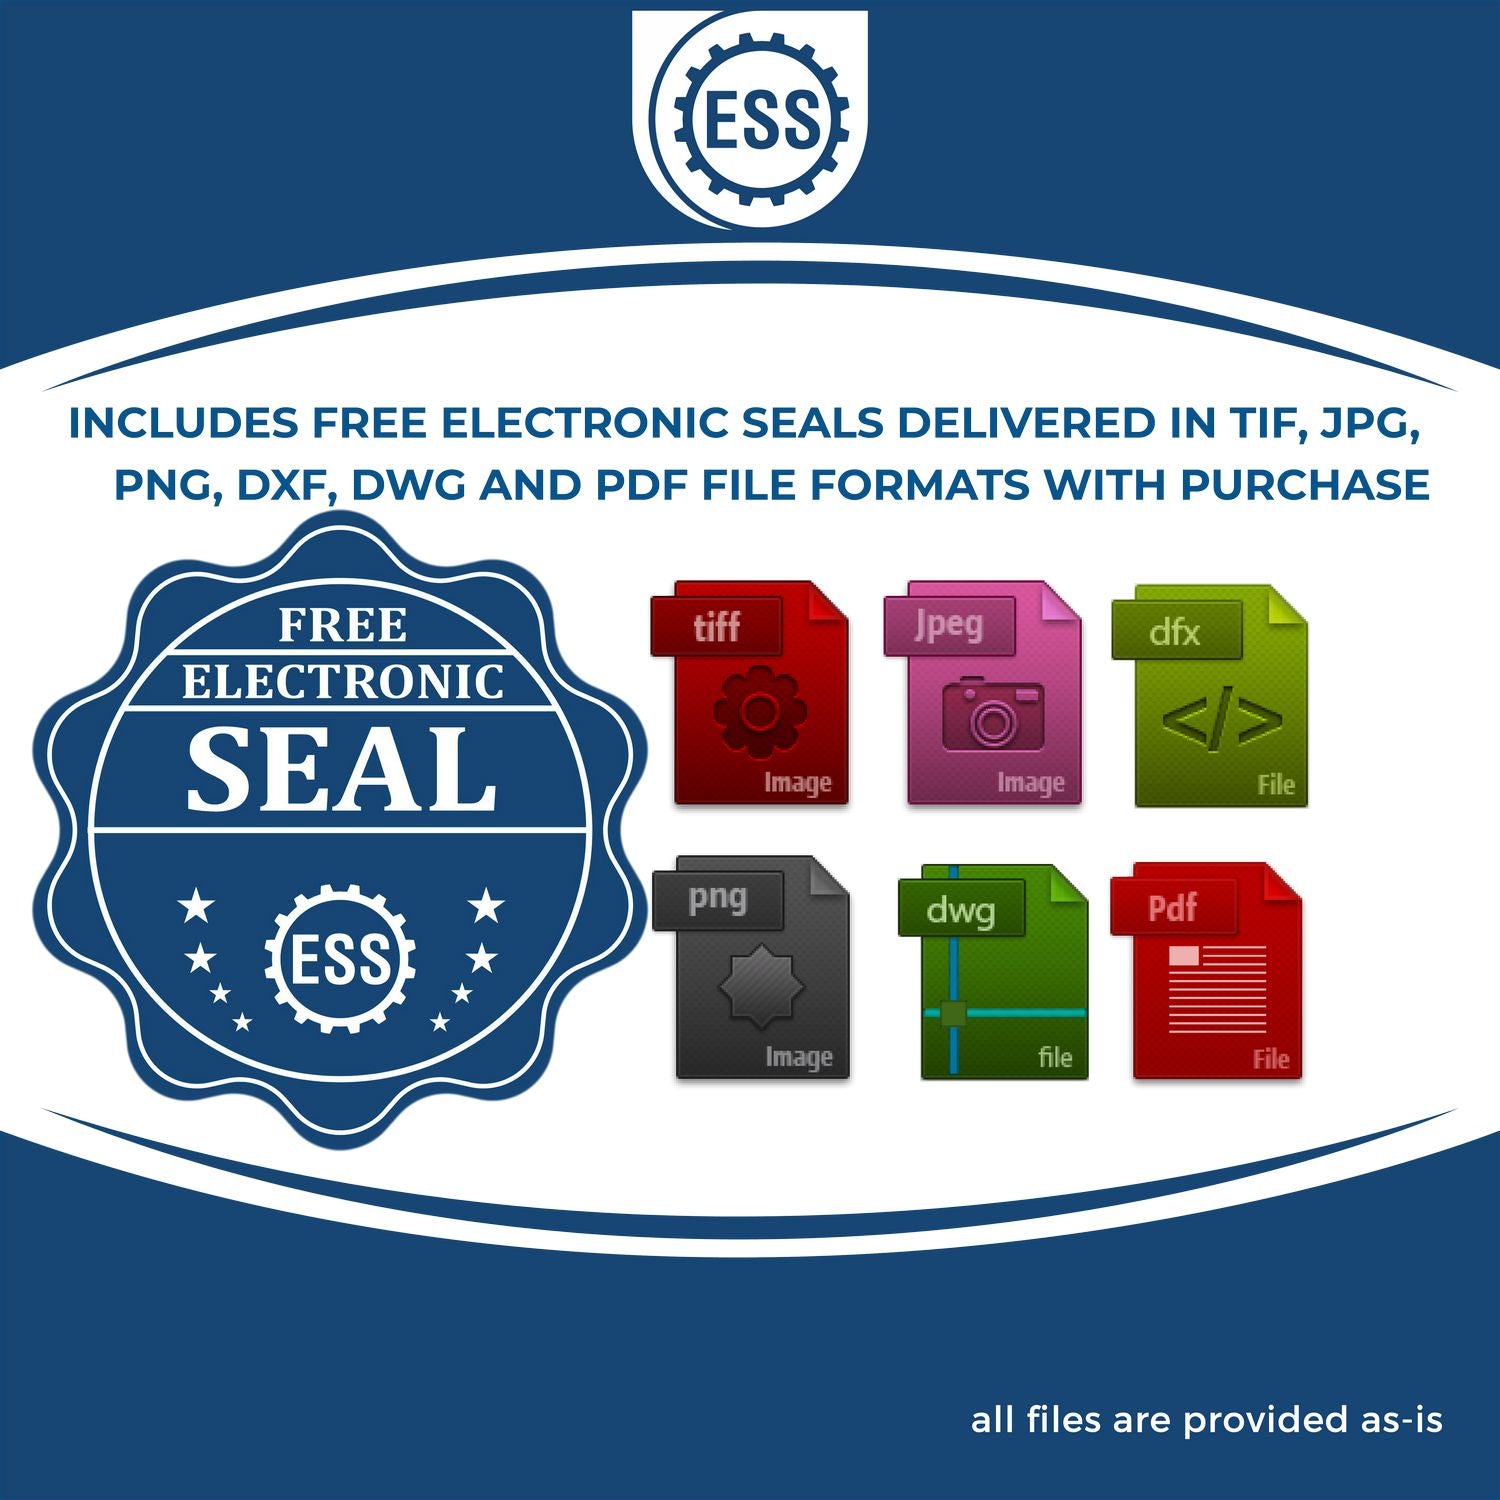 An infographic for the free electronic seal for the Self-Inking Iowa PE Stamp illustrating the different file type icons such as DXF, DWG, TIF, JPG and PNG.